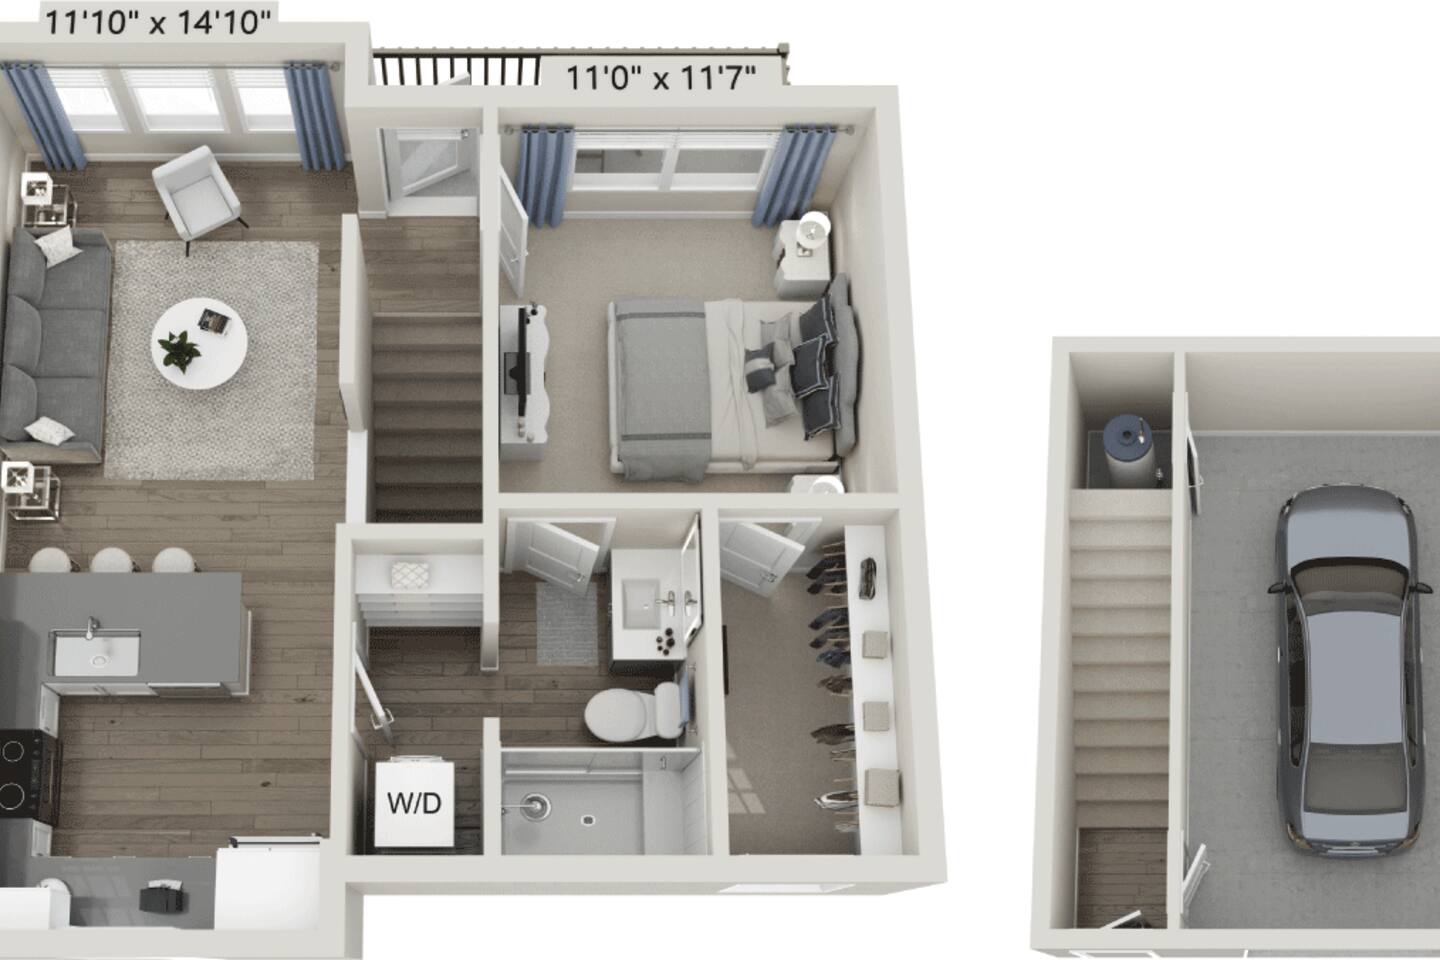 Floorplan diagram for Vista-Carriage Home TH, showing 1 bedroom